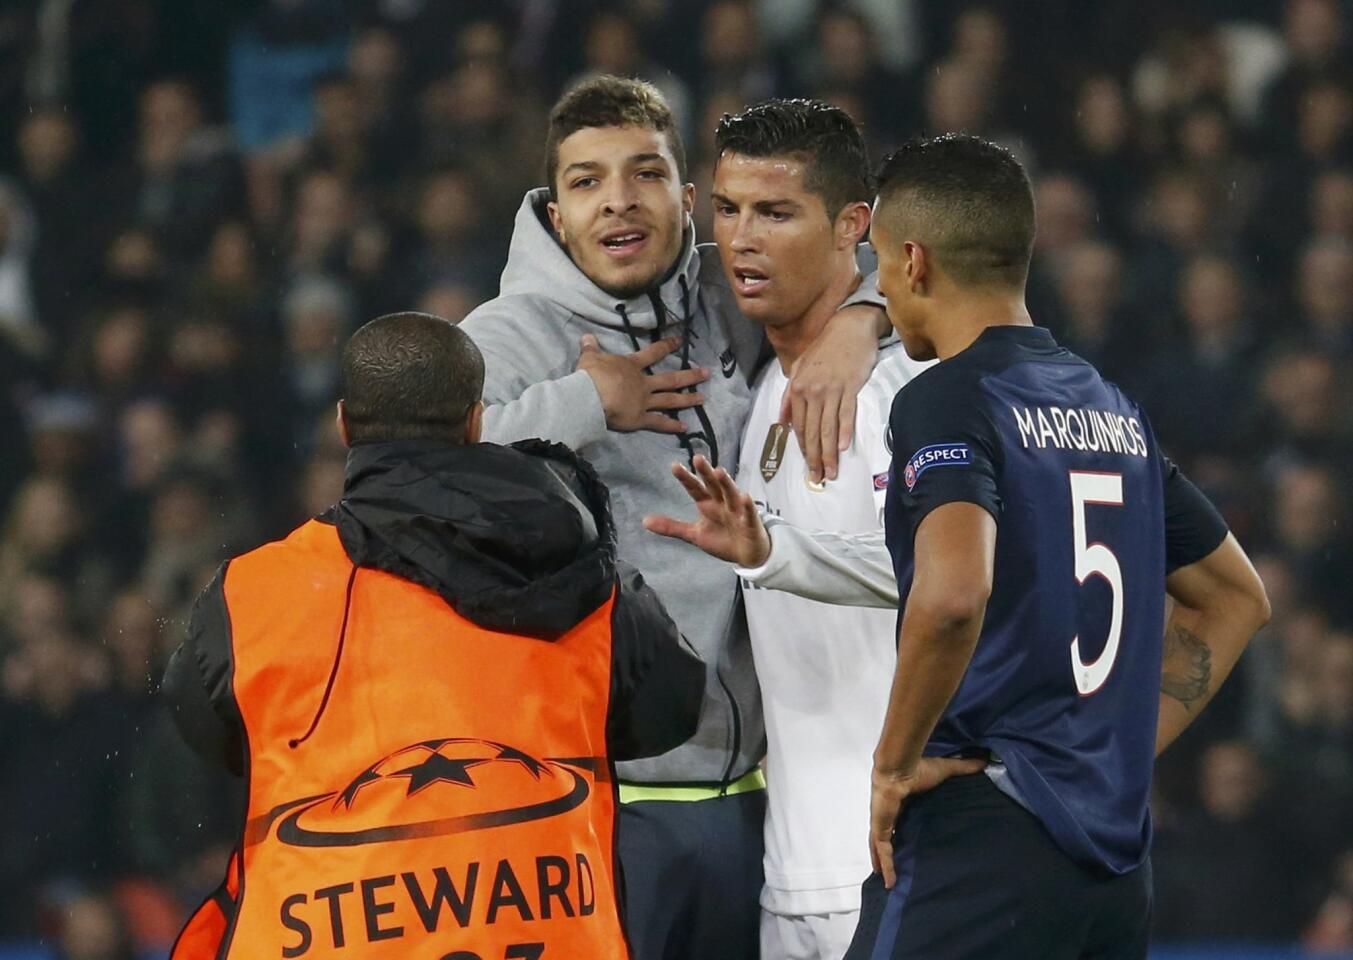 Real Madrid's Cristiano Ronaldo gestures as a security steward arrives to remove a fan who ran onto the pitch during their Champions League Group A soccer match against Paris Saint Germain at the Parc des Princes stadium in Paris